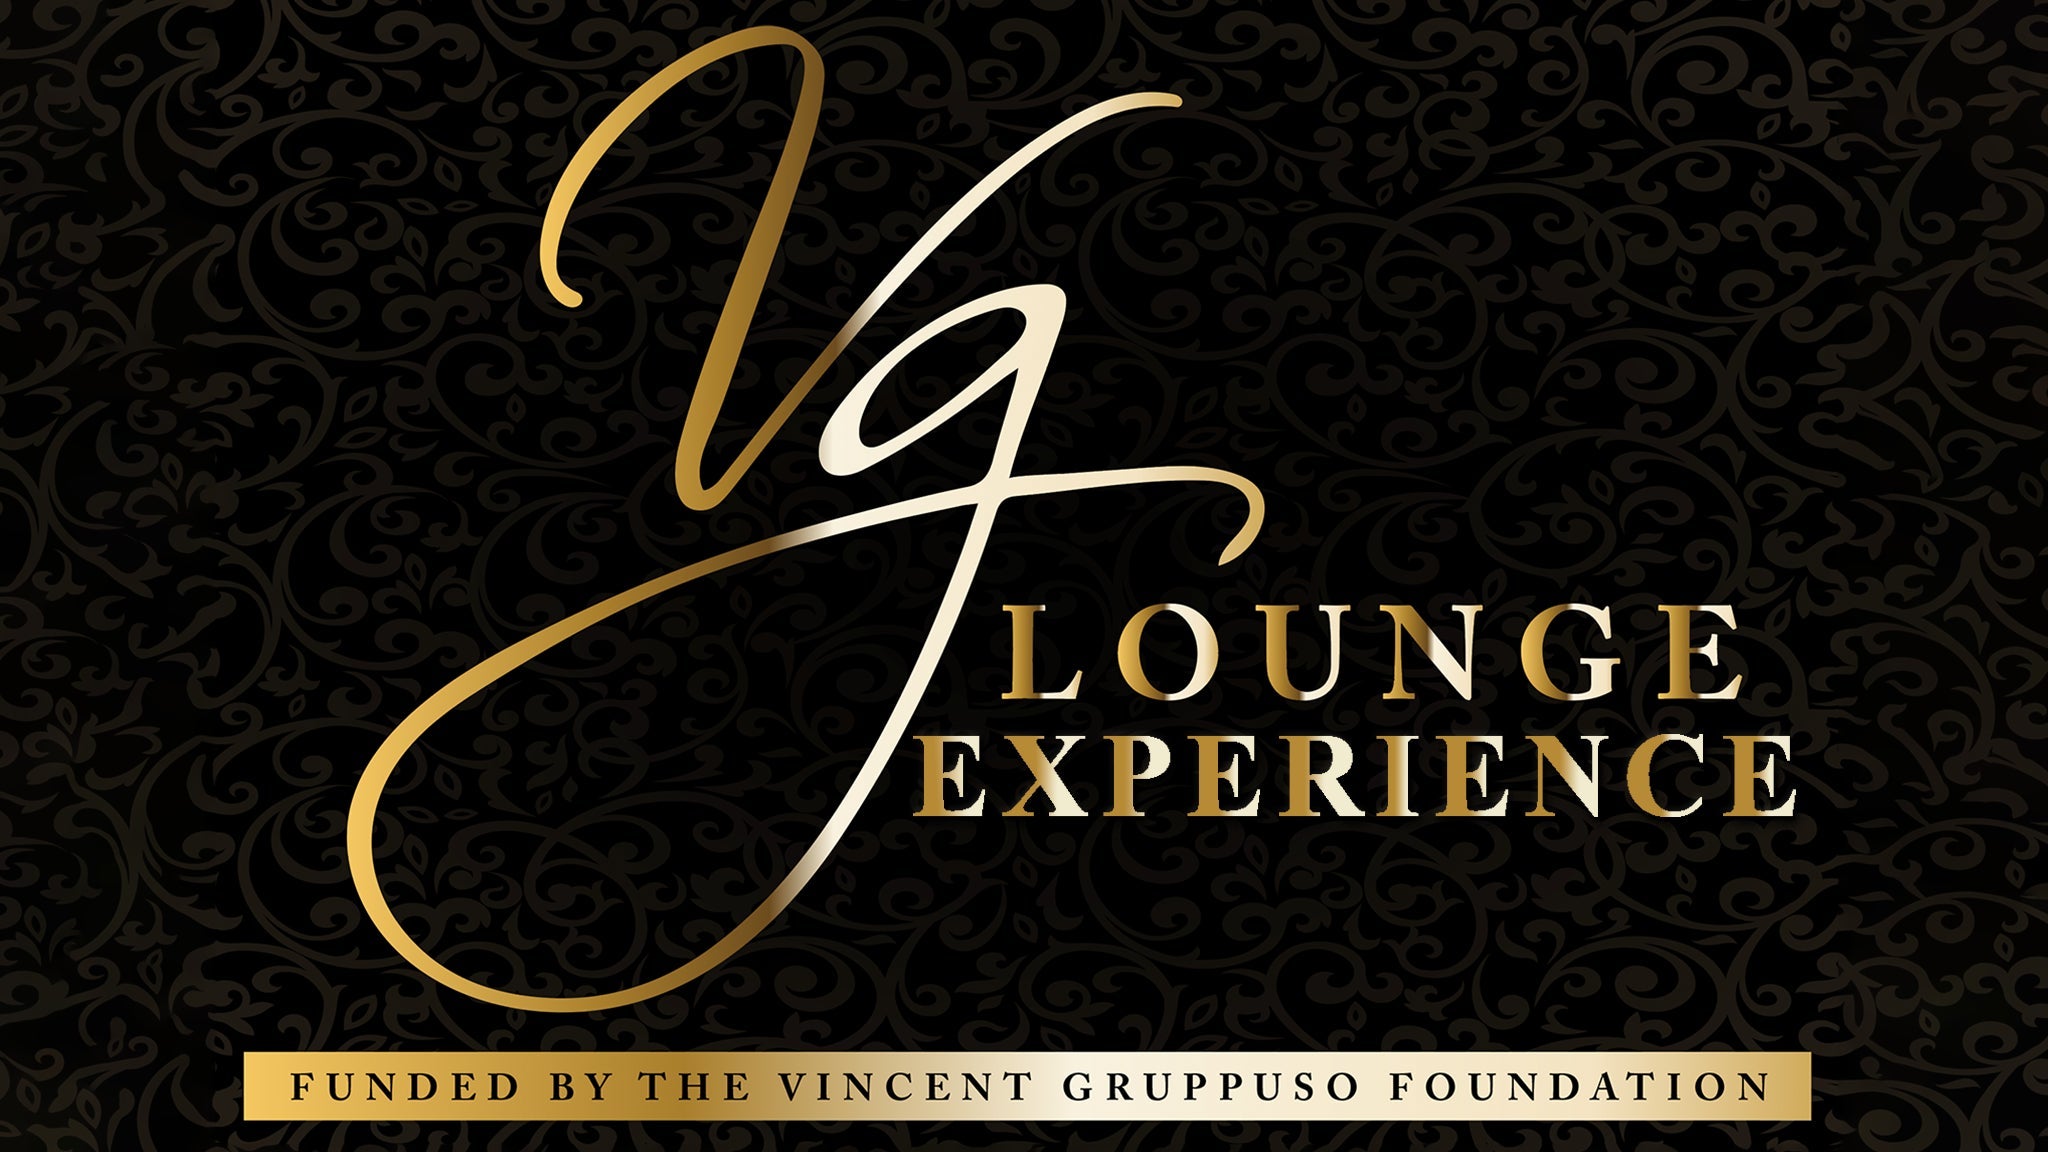 VG Lounge Experience - Anthony Rodia in Staten Island promo photo for Artist presale offer code